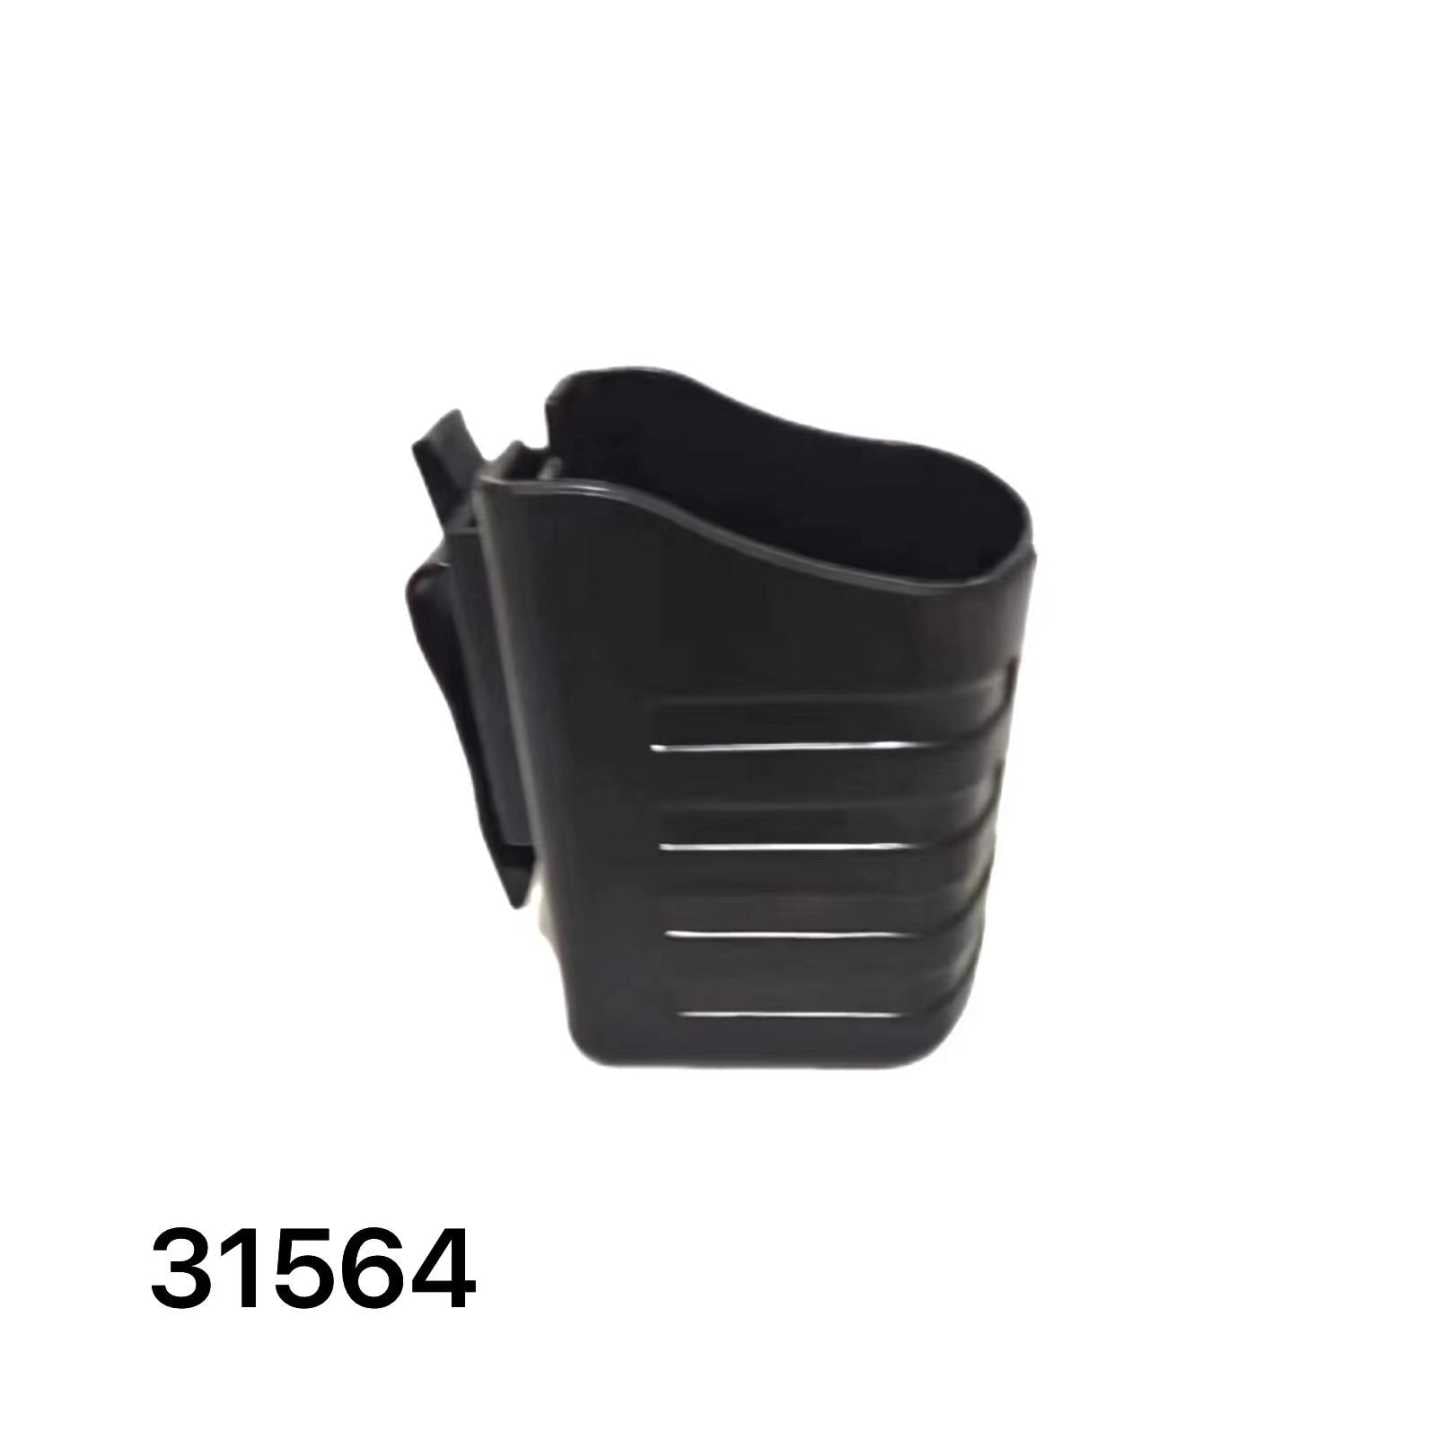 Cup holder with clip for fishing box - 31564